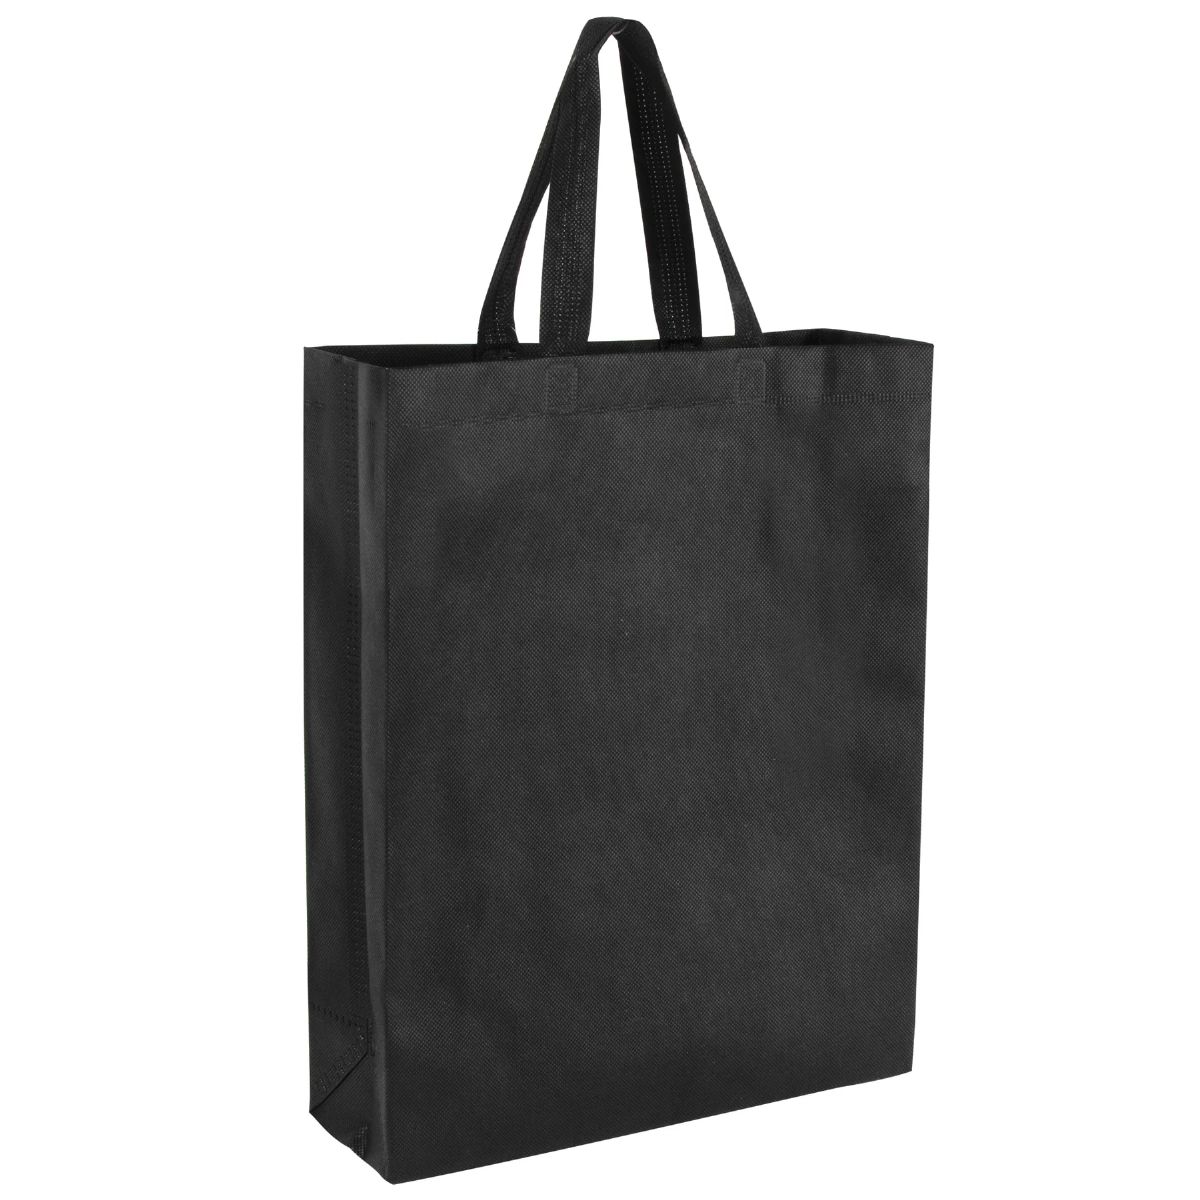 100 Pieces of Tall Grocery Bag 15 X 12 Black Only